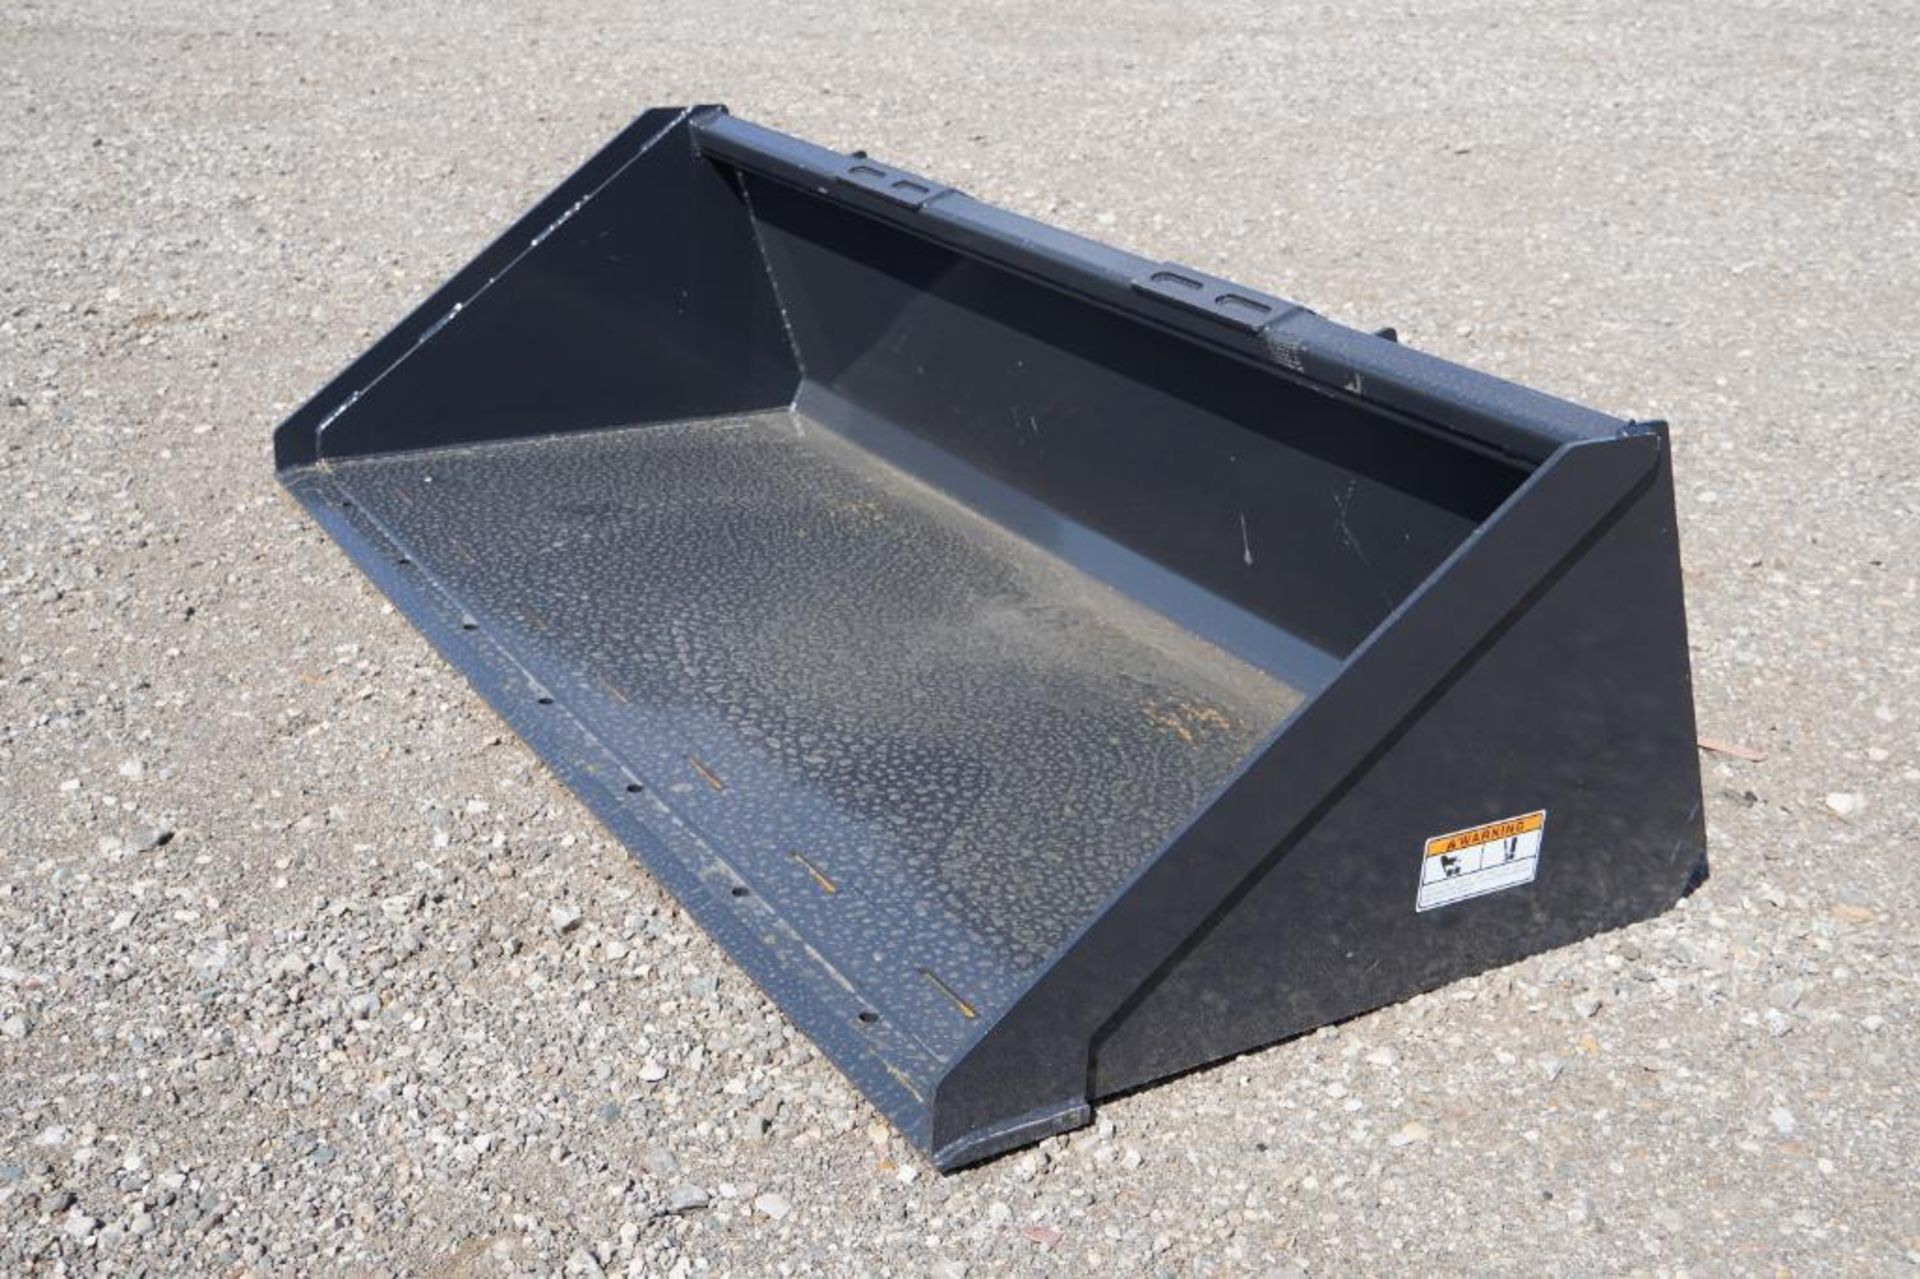 New Skid Steer Track Duty Bucket Attachment - Image 2 of 5